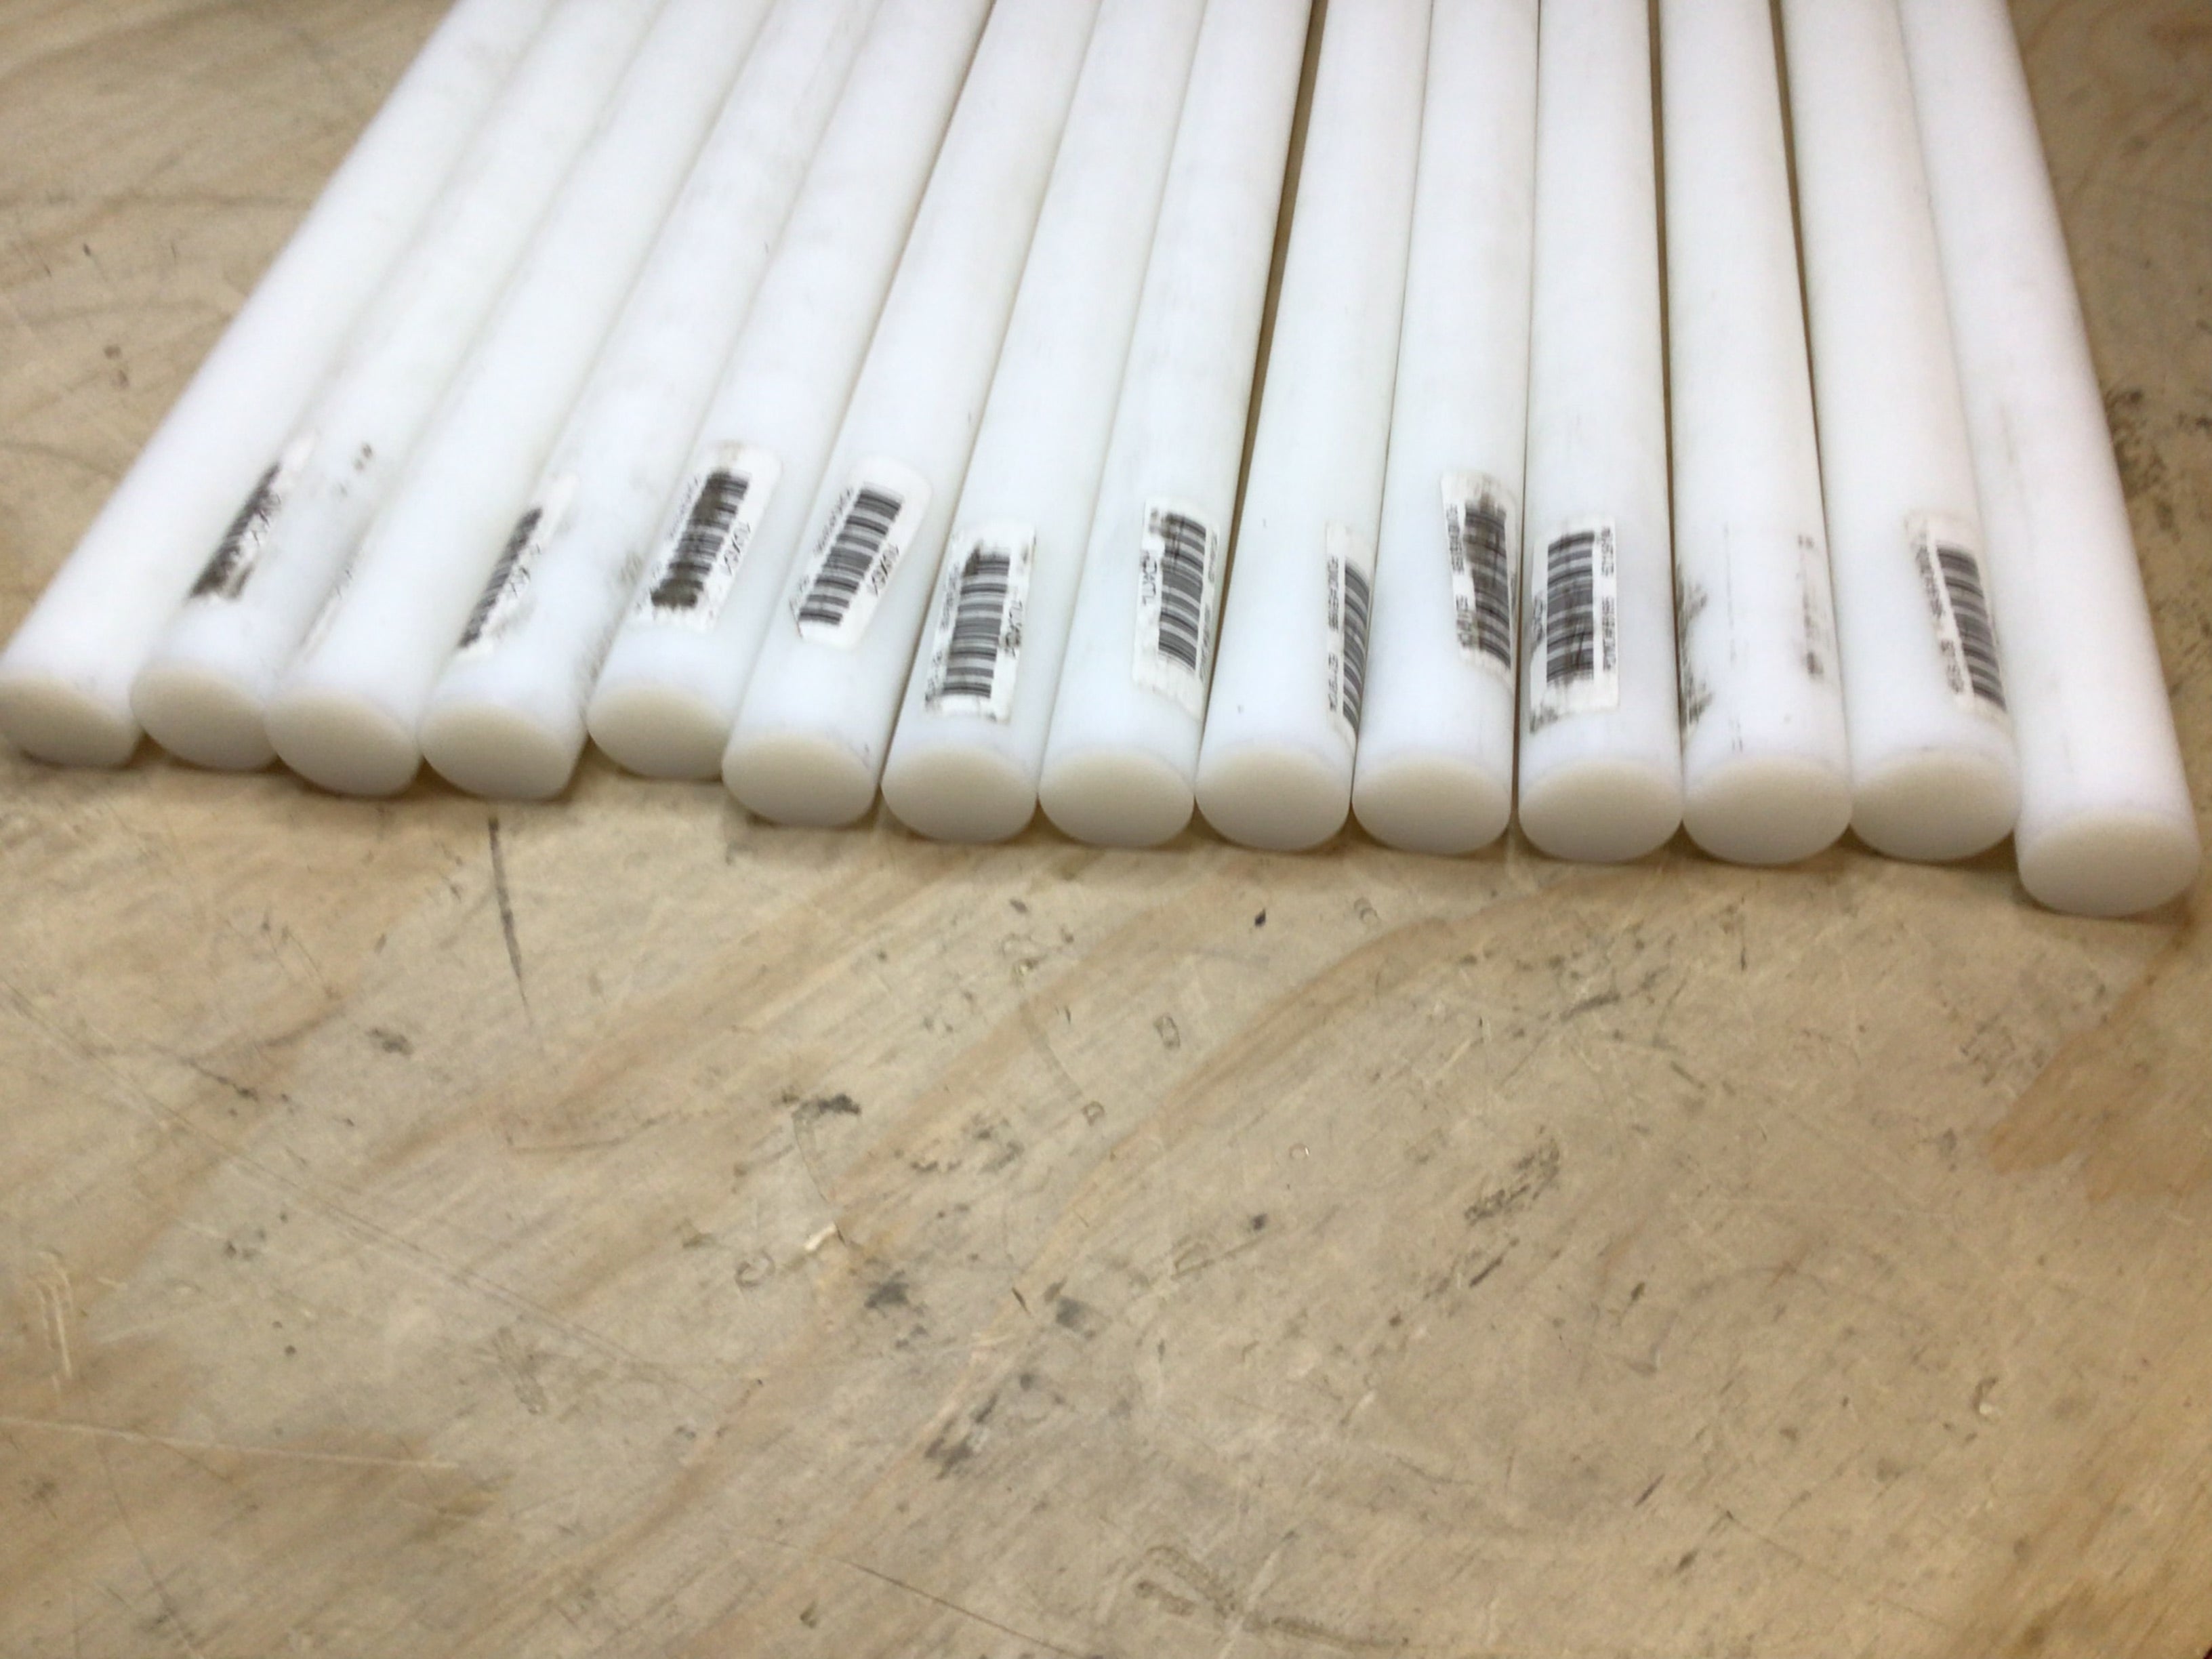 Plastic Rod 3 ft White Opaque 5800 psi Tensile Strength -22° to 180°F (14 rods) (8132142465262)